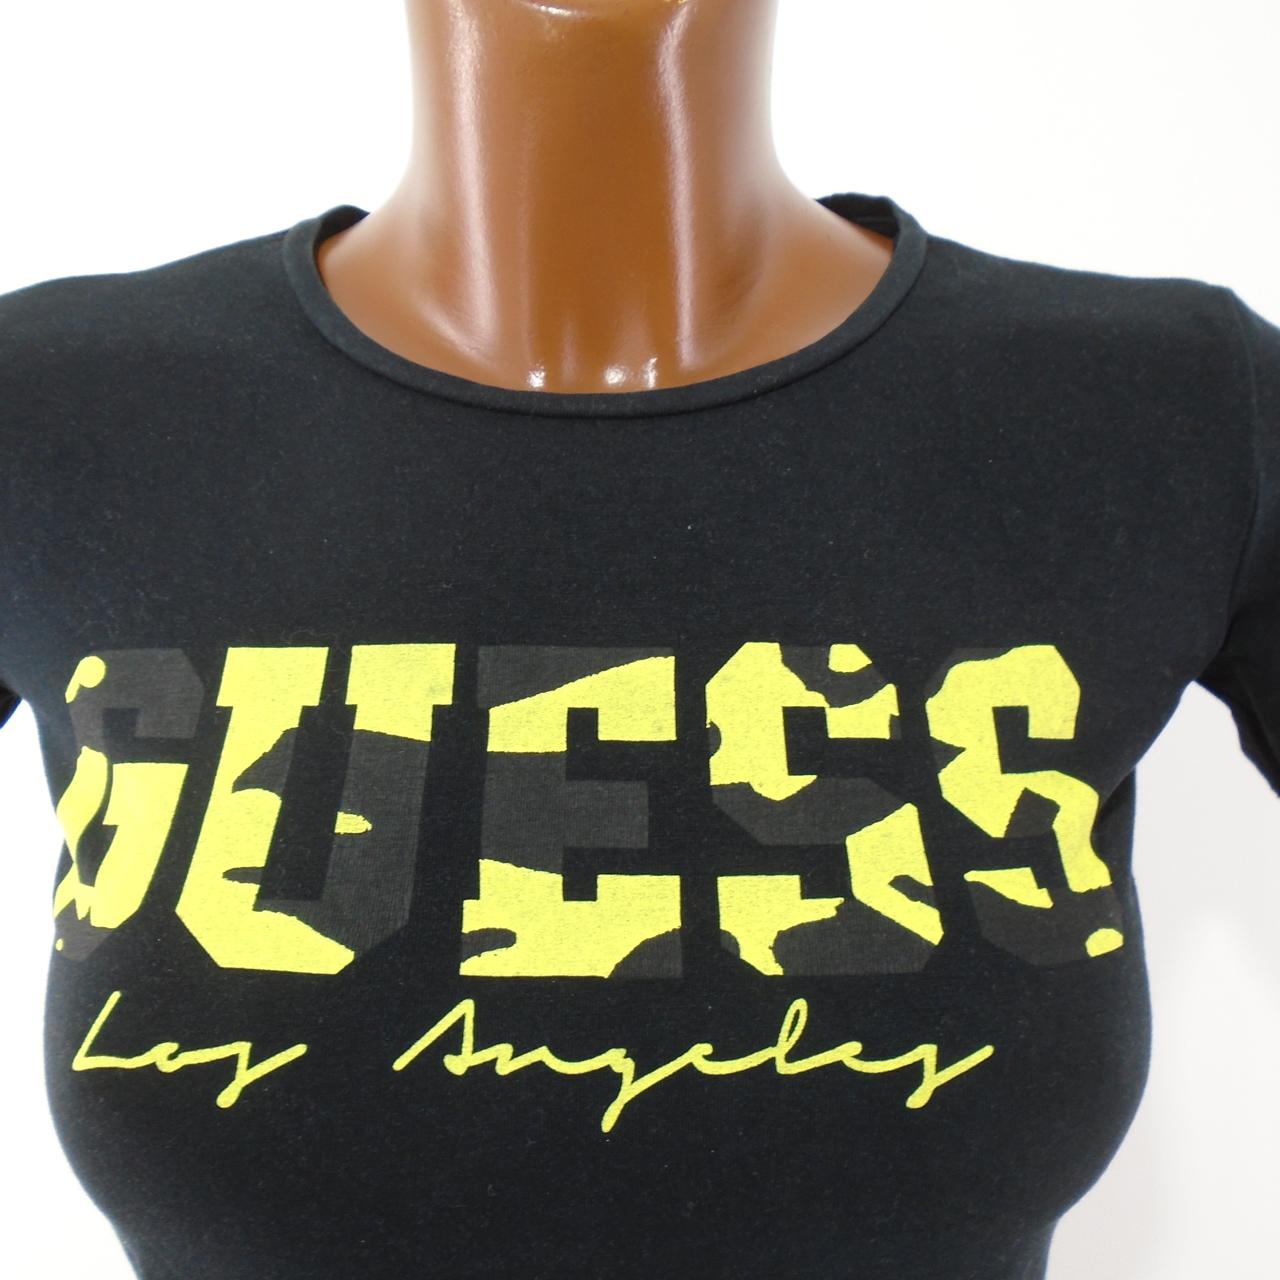 Women's T-Shirt GUESS. Black. S. Used. Very good